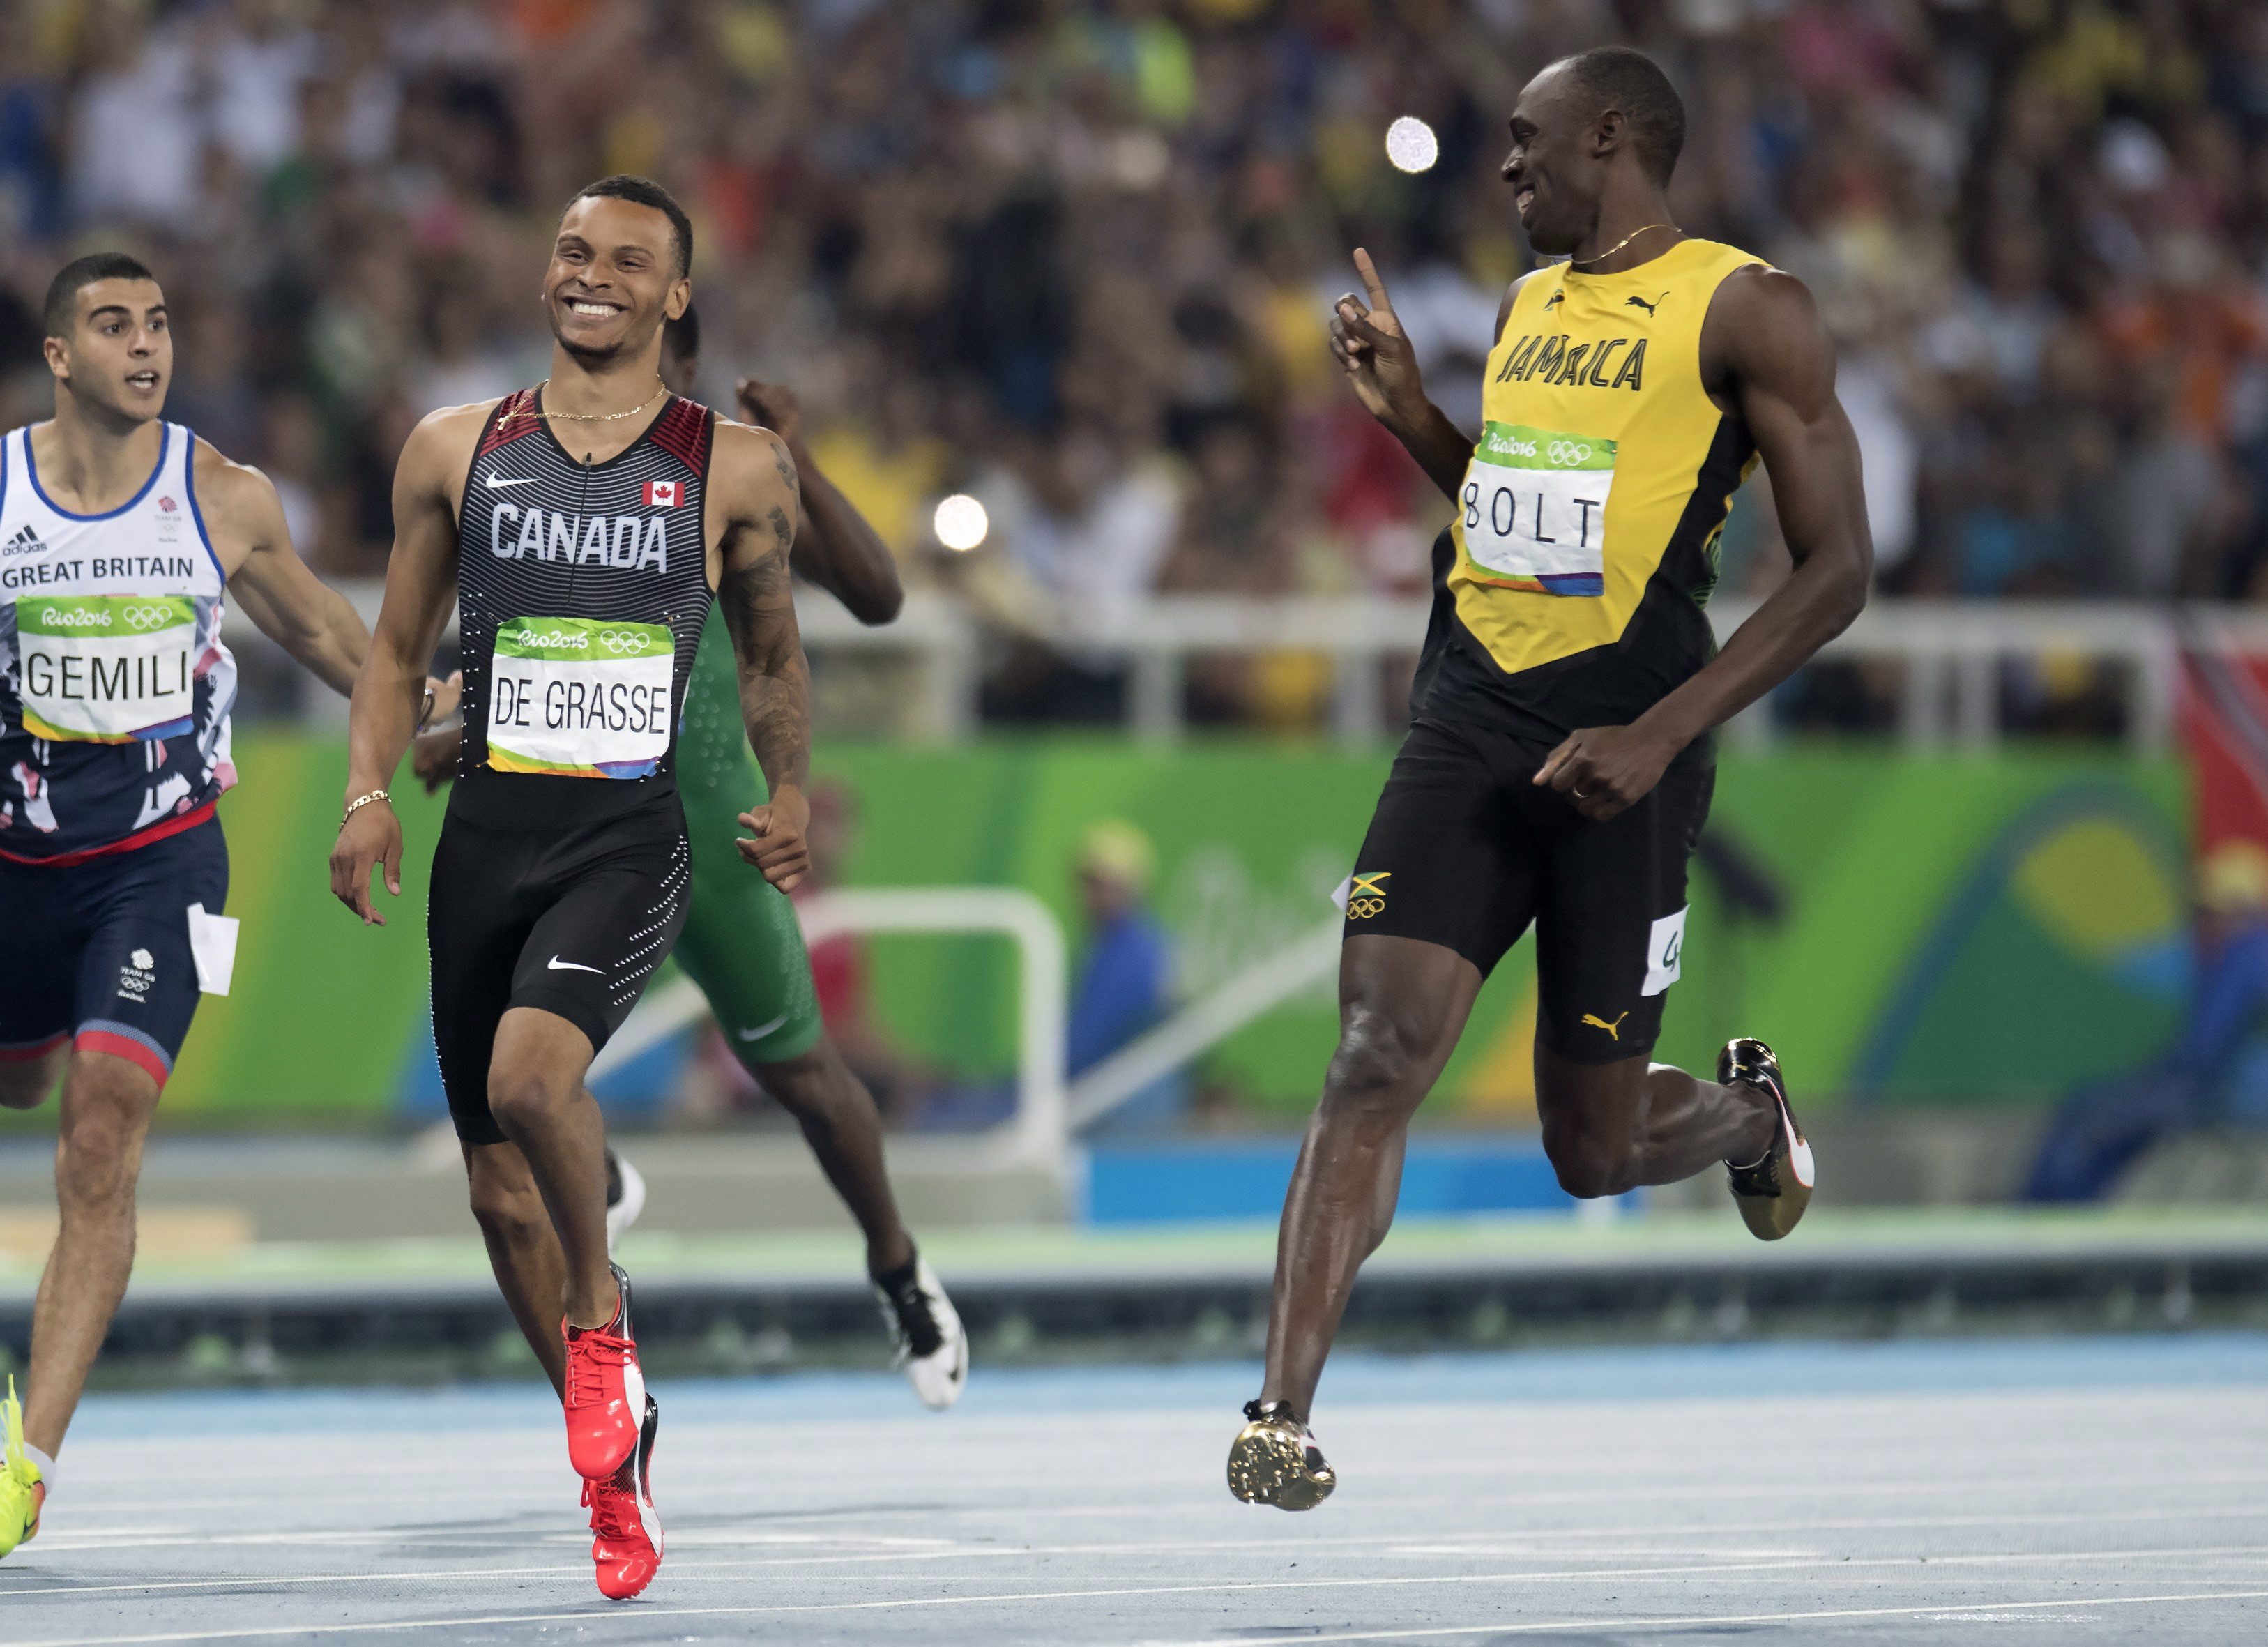 Bolt and De Grasse smiling as they cross the finish line 